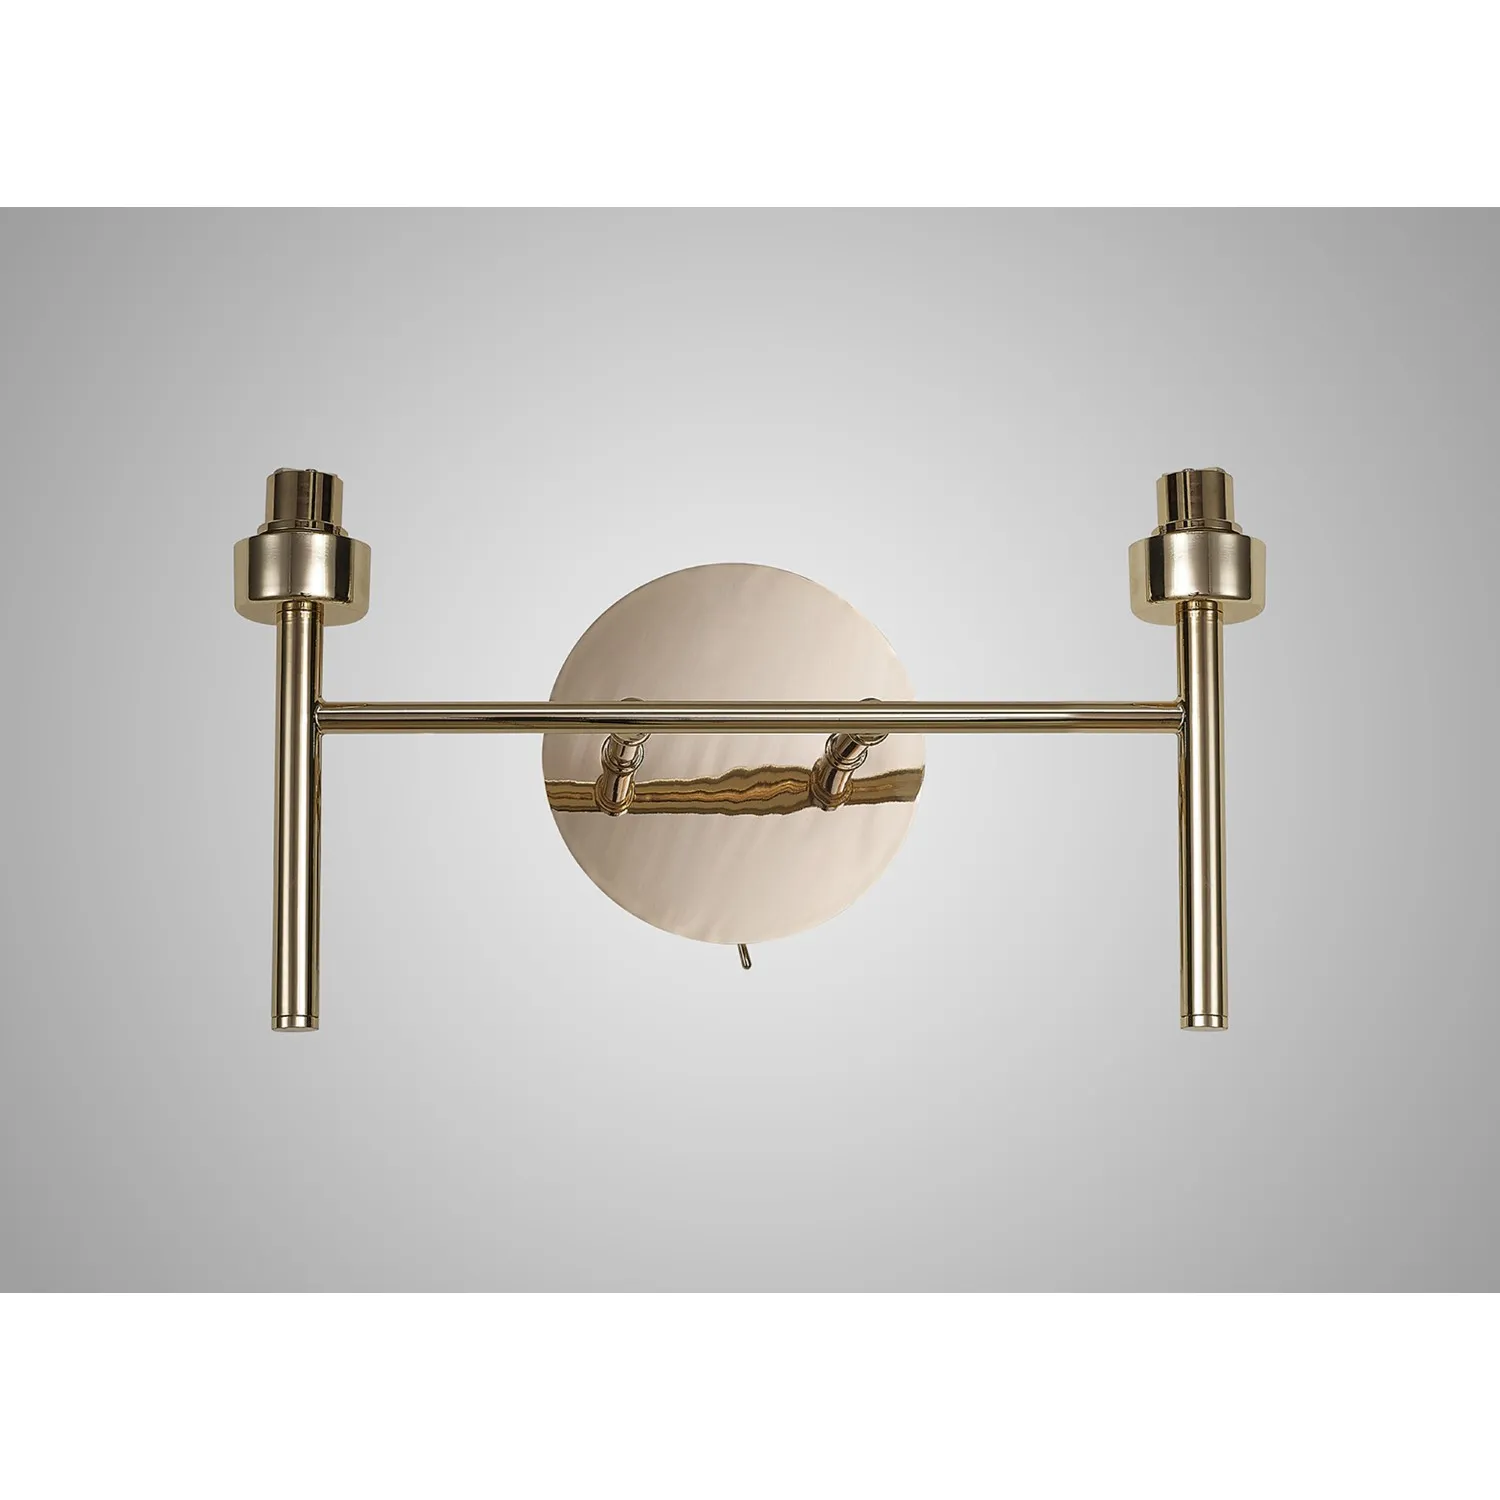 Abingdon French Gold 2 Light G9 Universal Switched Wall Lamp, Suitable For A Vast Selection Of Glass Shades